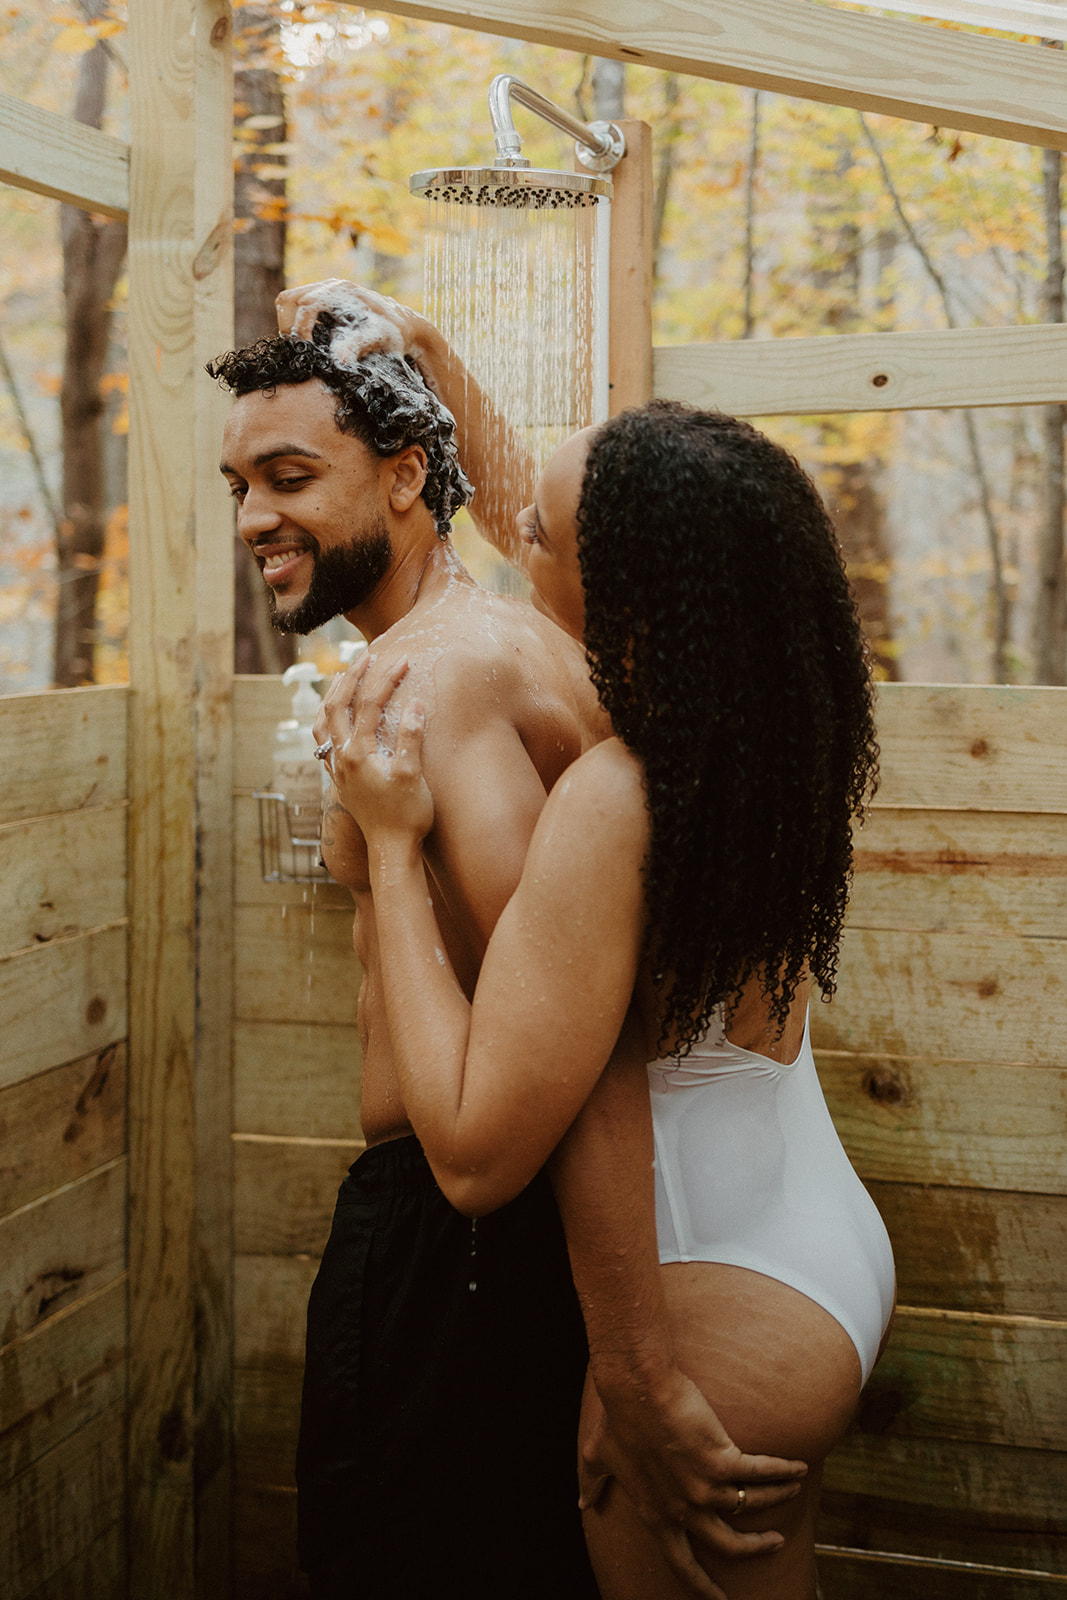 the couple showering together at their airbnb